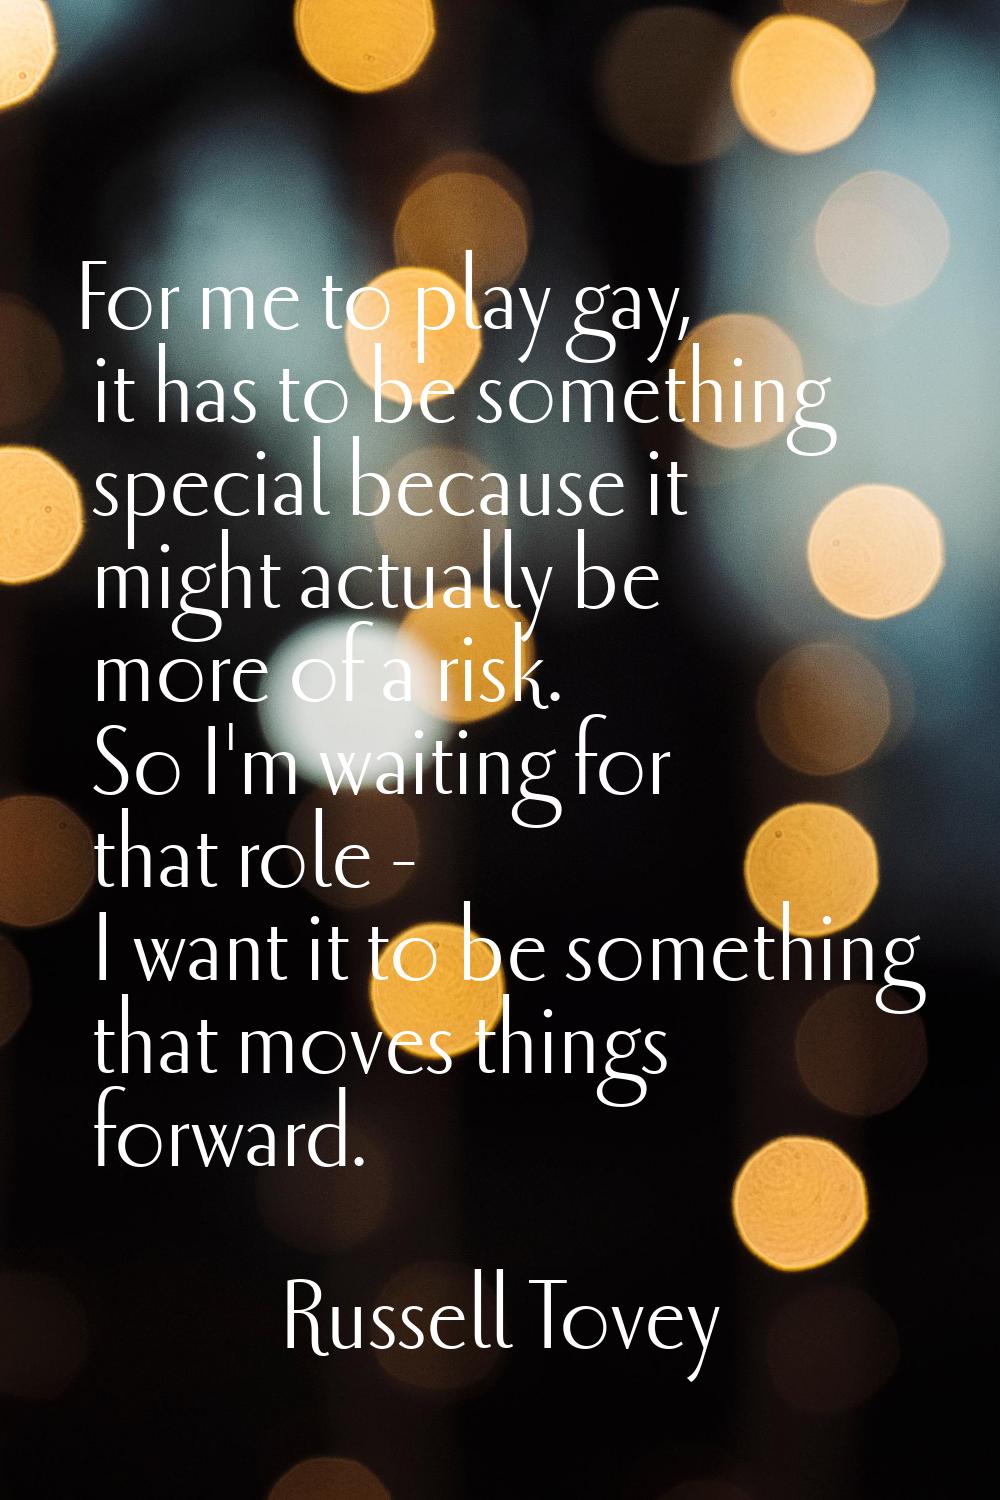 For me to play gay, it has to be something special because it might actually be more of a risk. So 